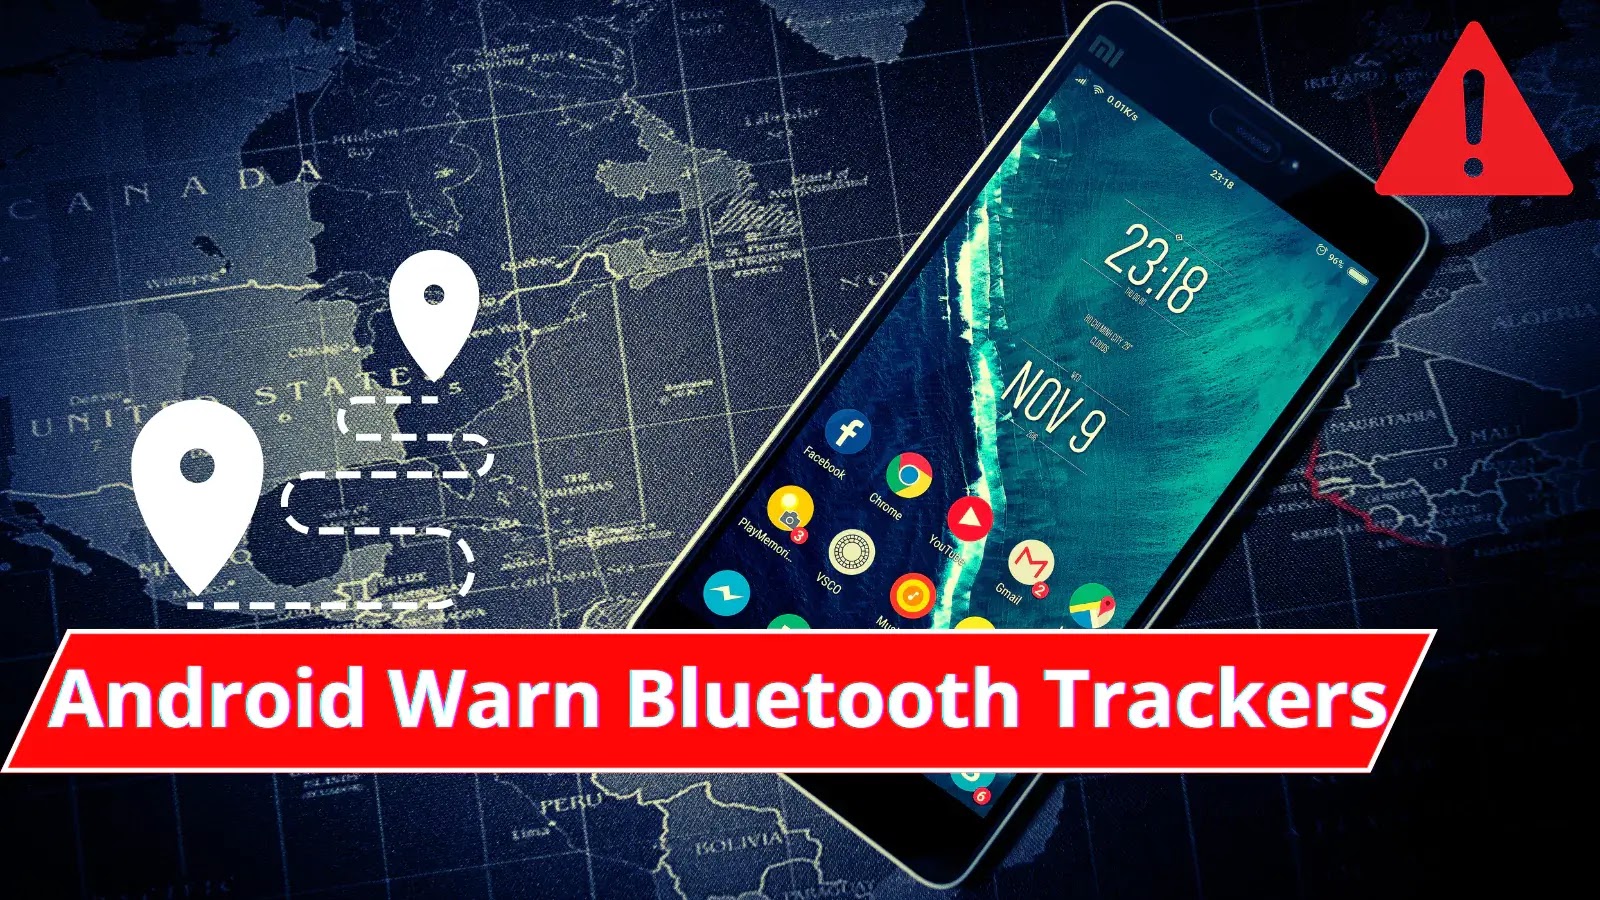 Android Phones Will Now Warn About Unknown Bluetooth Trackers, Including AirTags